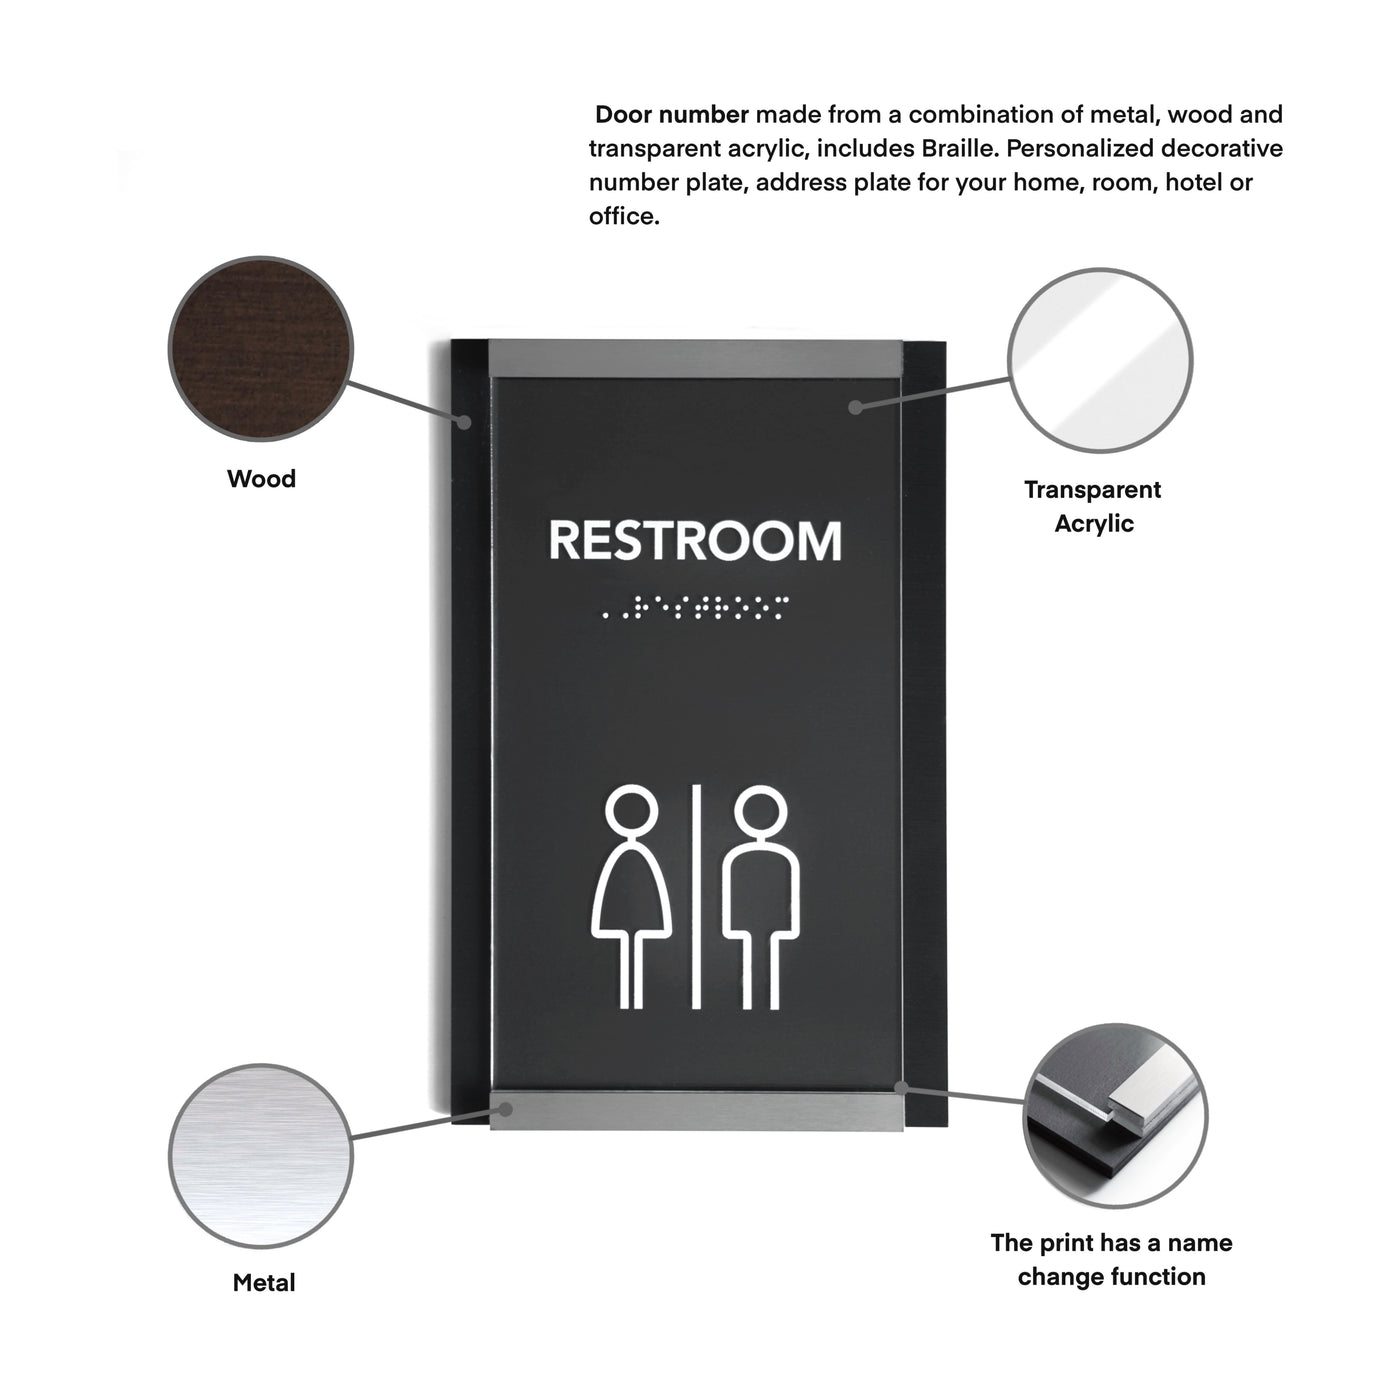 a restroom sign with instructions on how to use it